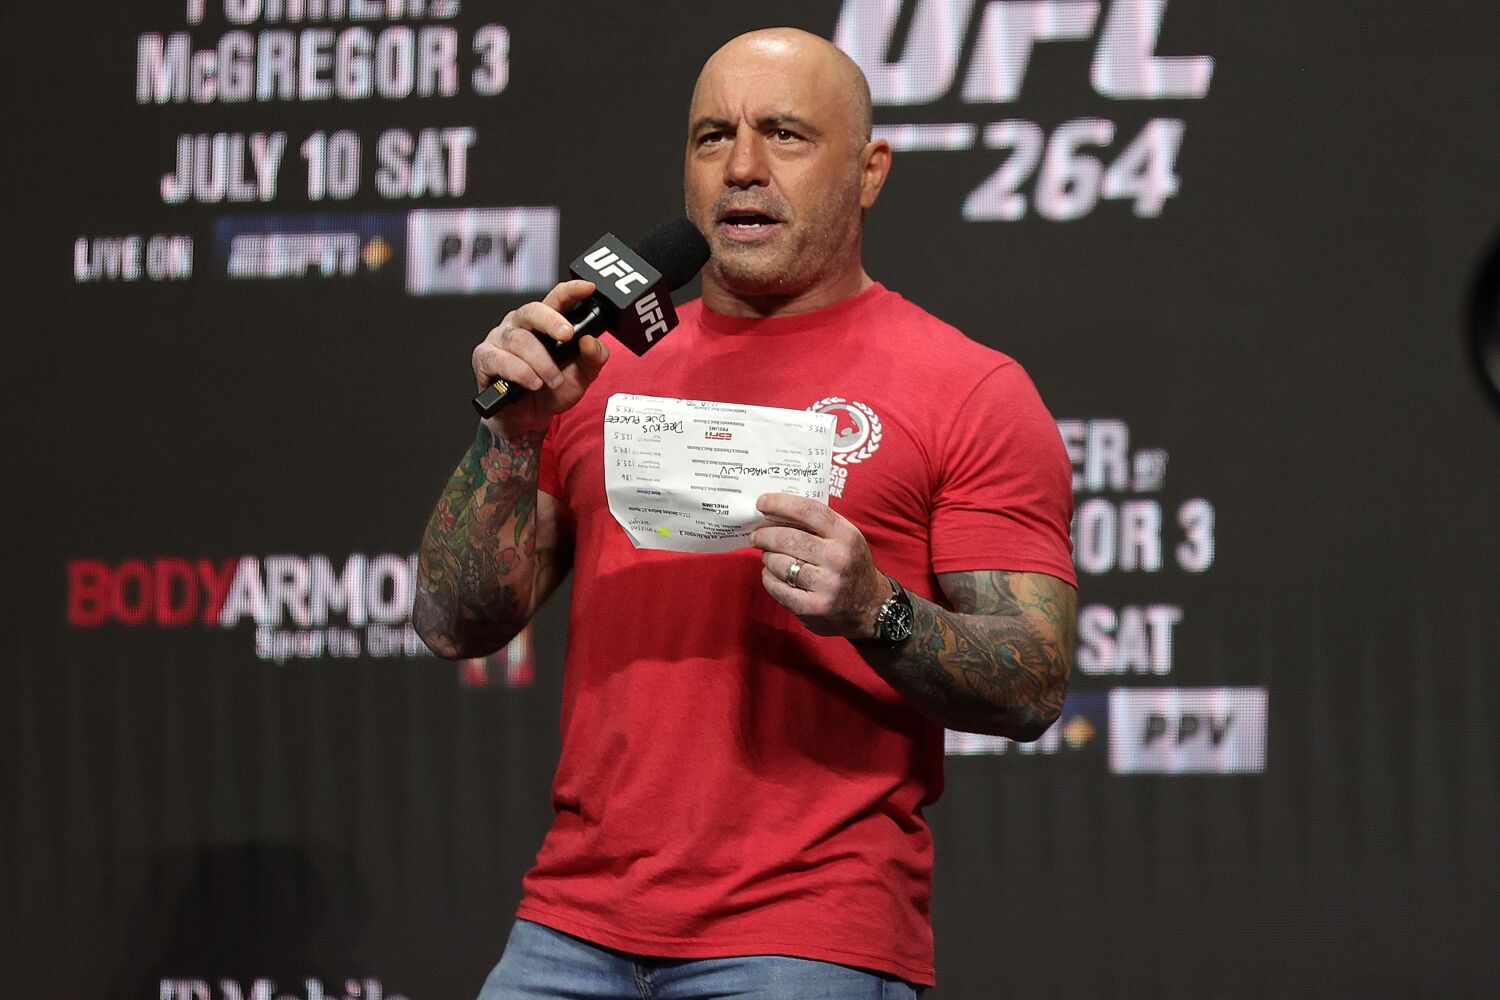 Joe Rogan criticized for an antisemitic trope he used in defense of Rep. Ilhan Omar